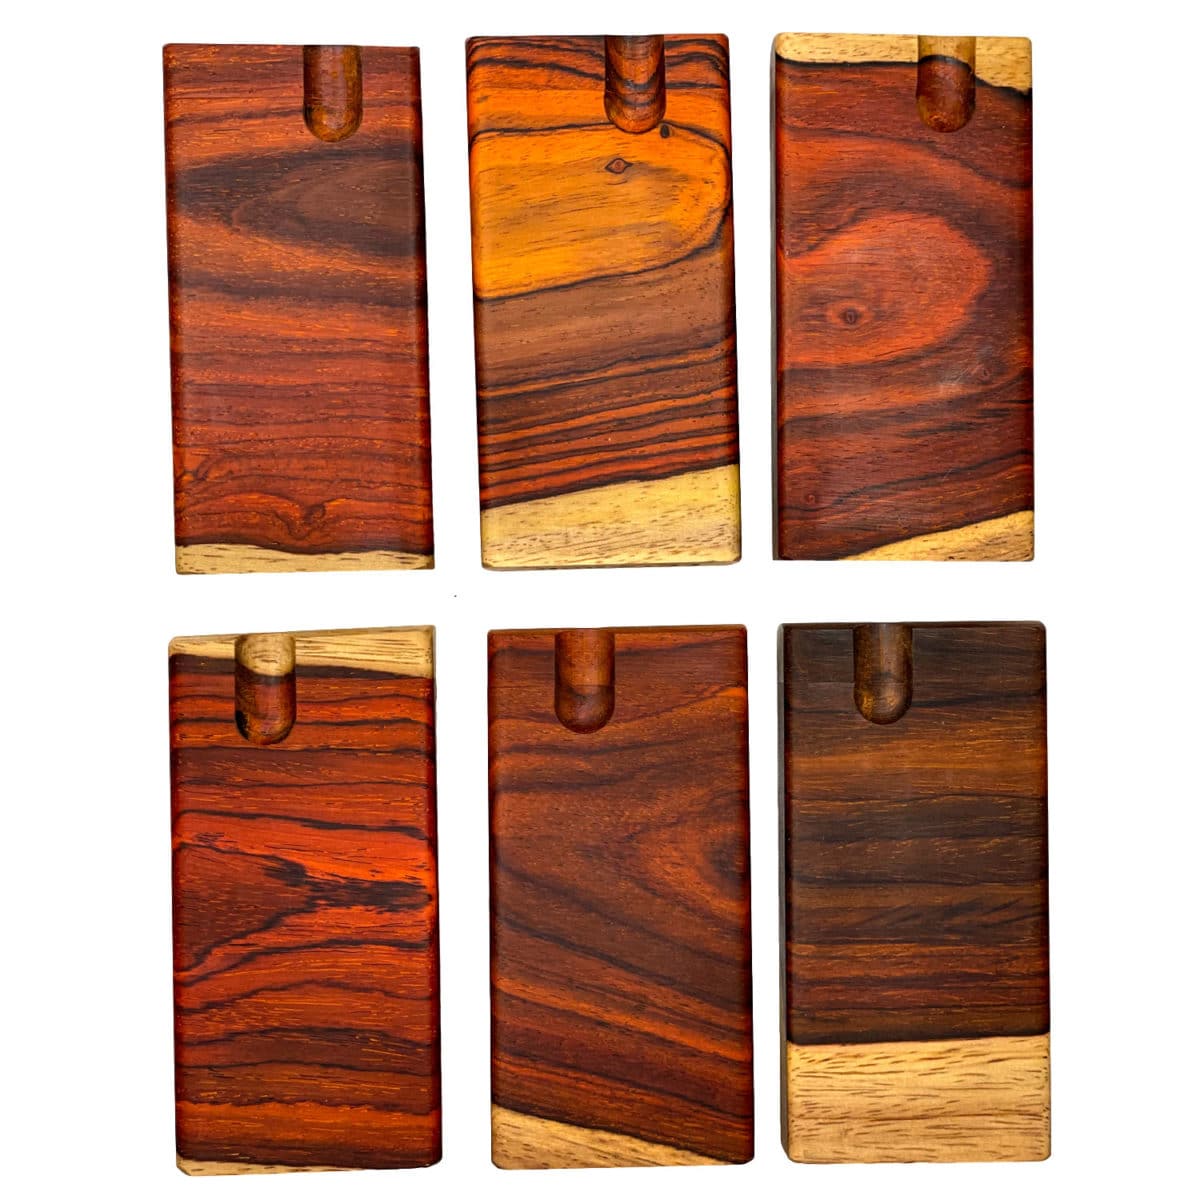 4" Dugout with 3" One Hitter Pipe Cocobolo Wood Dugout with One Hitter 